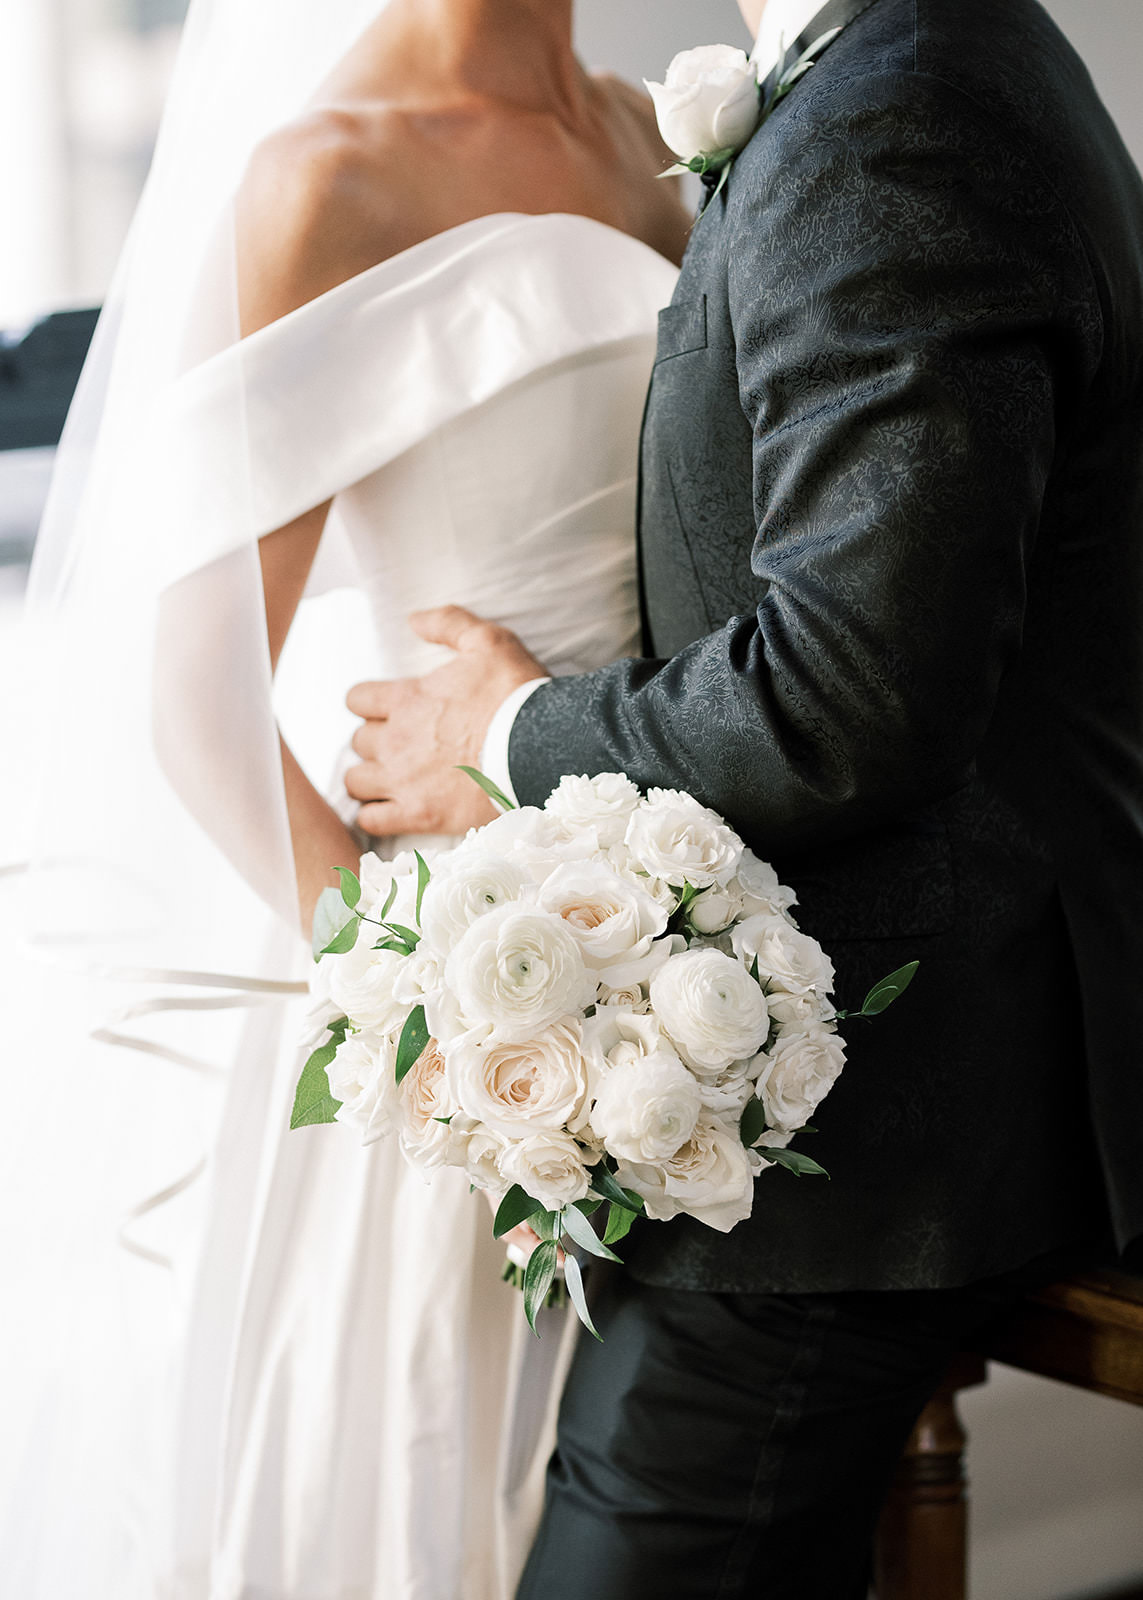 Classic Bride Holding All White Roses and Greenery Floral Bouquet and Groom Wedding Portrait | Tampa Bay Wedding Florist Botanica International Design Studio